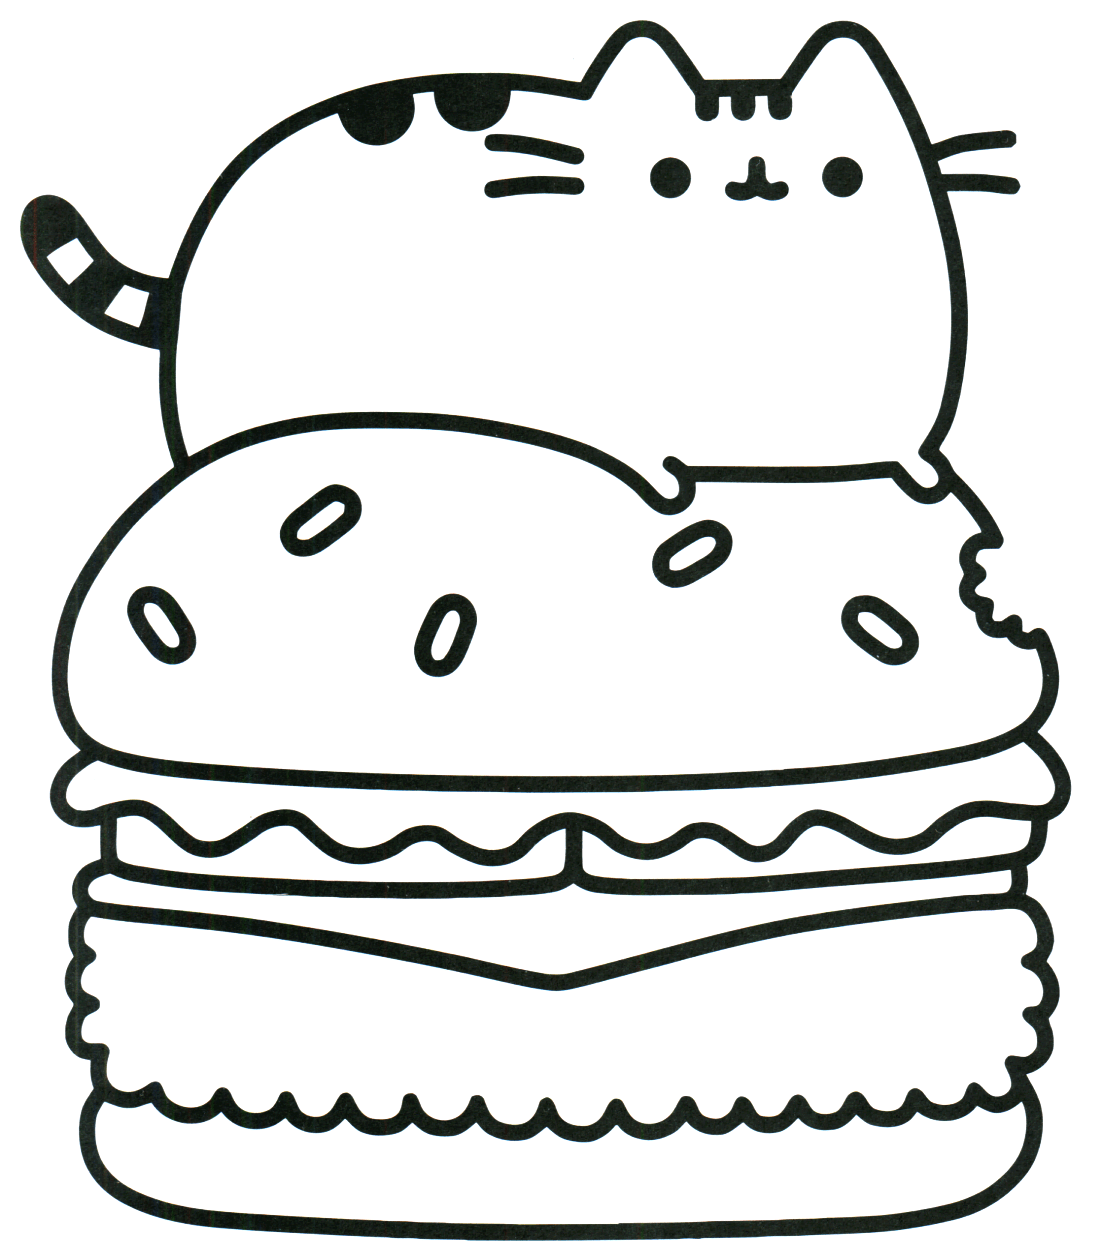 Pusheen Coloring Pages at GetColorings.com | Free ...